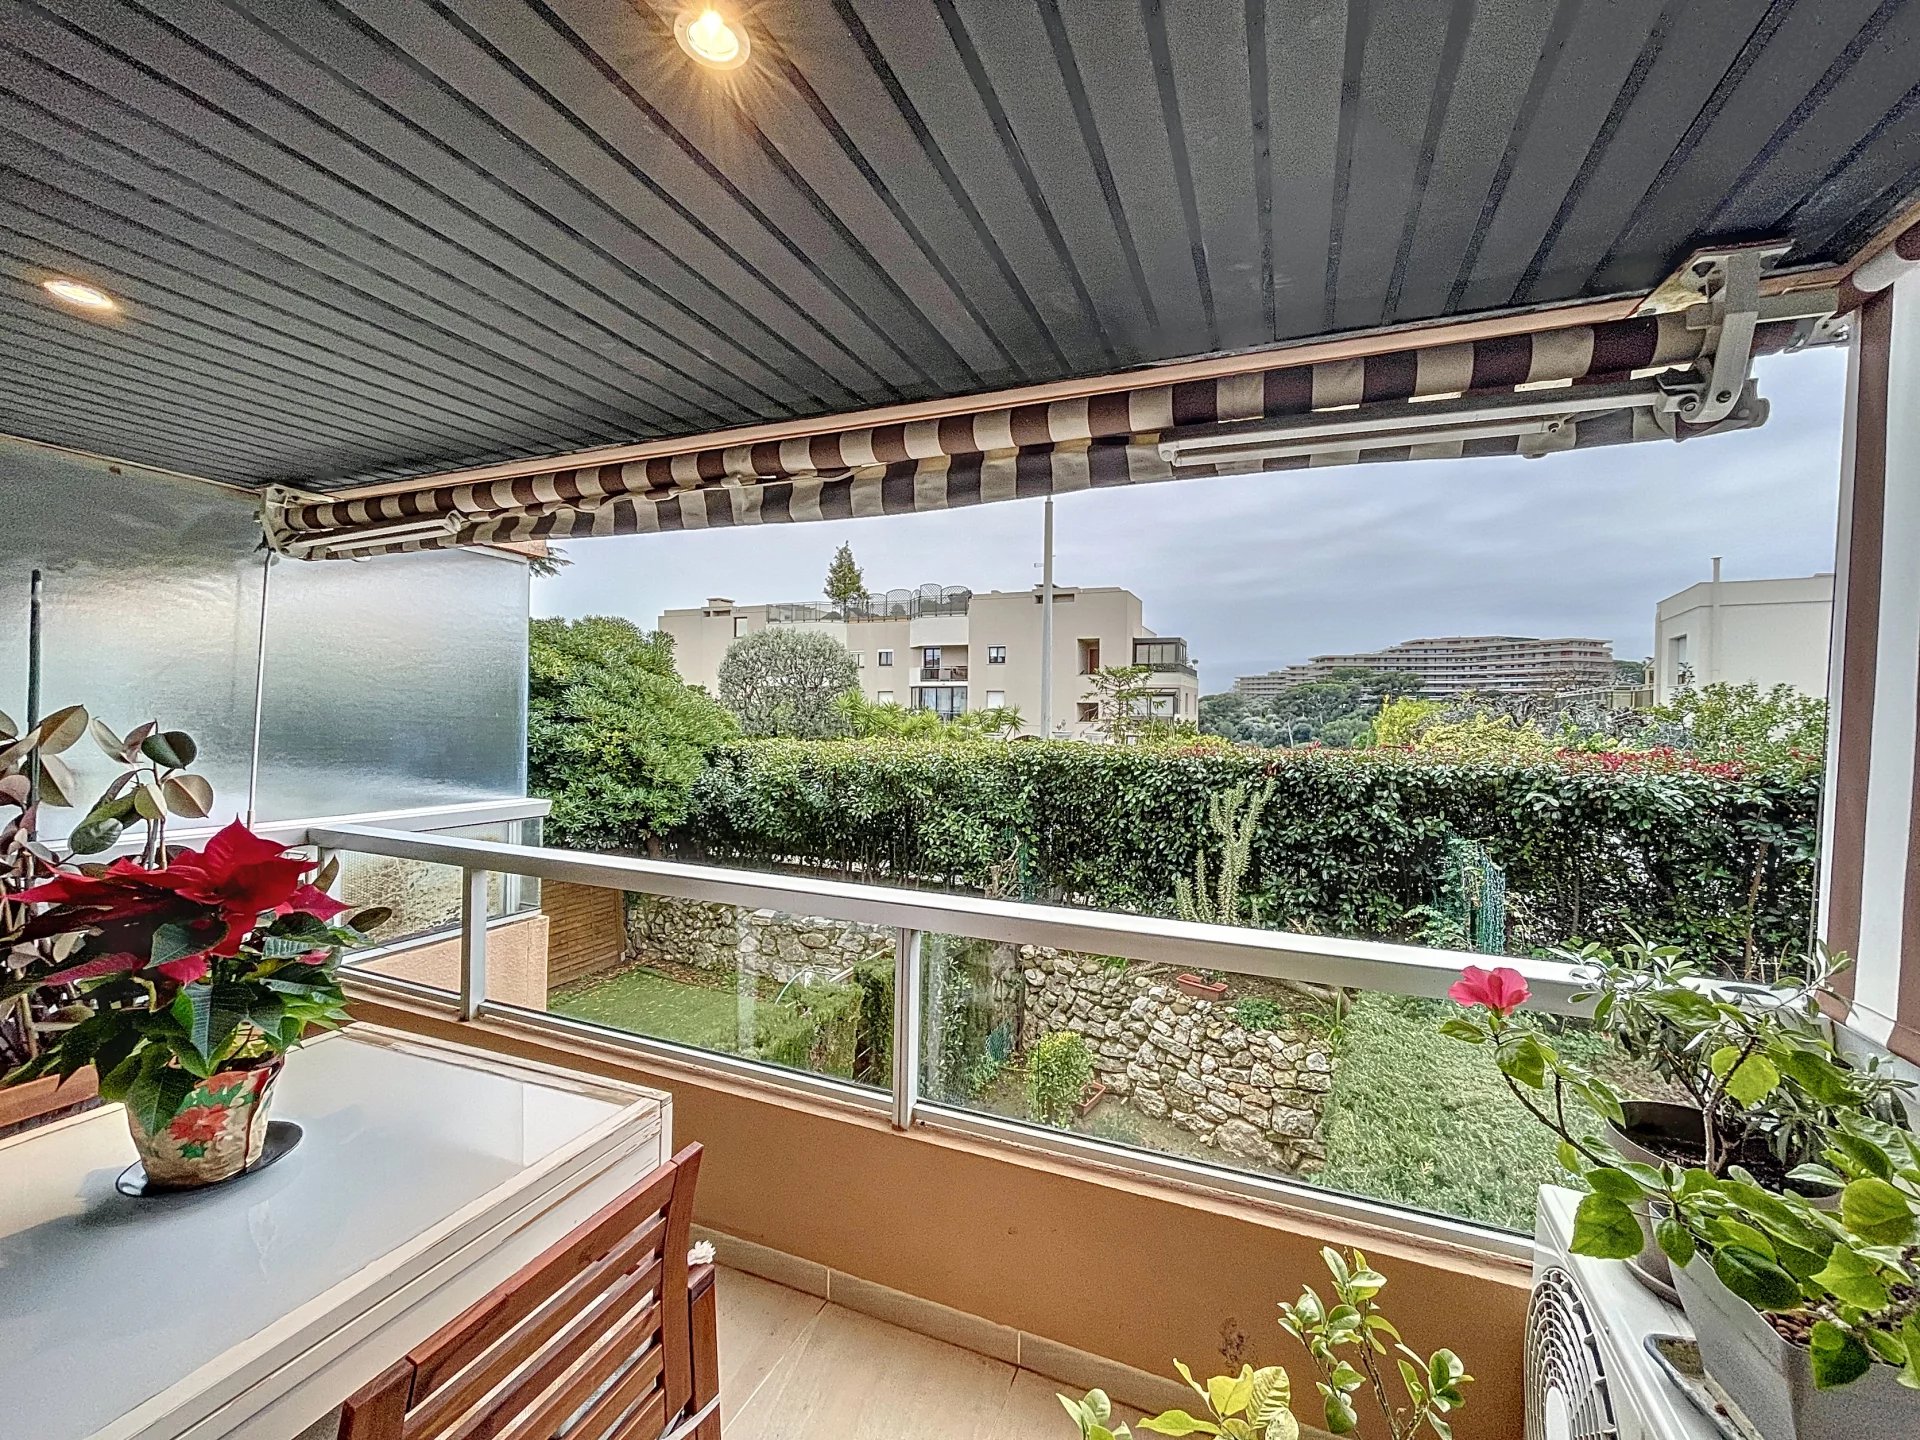 Charming 60m² Apartment, Convertible into 3 Rooms, Terrace, Balcony, and Sea View in Nice.